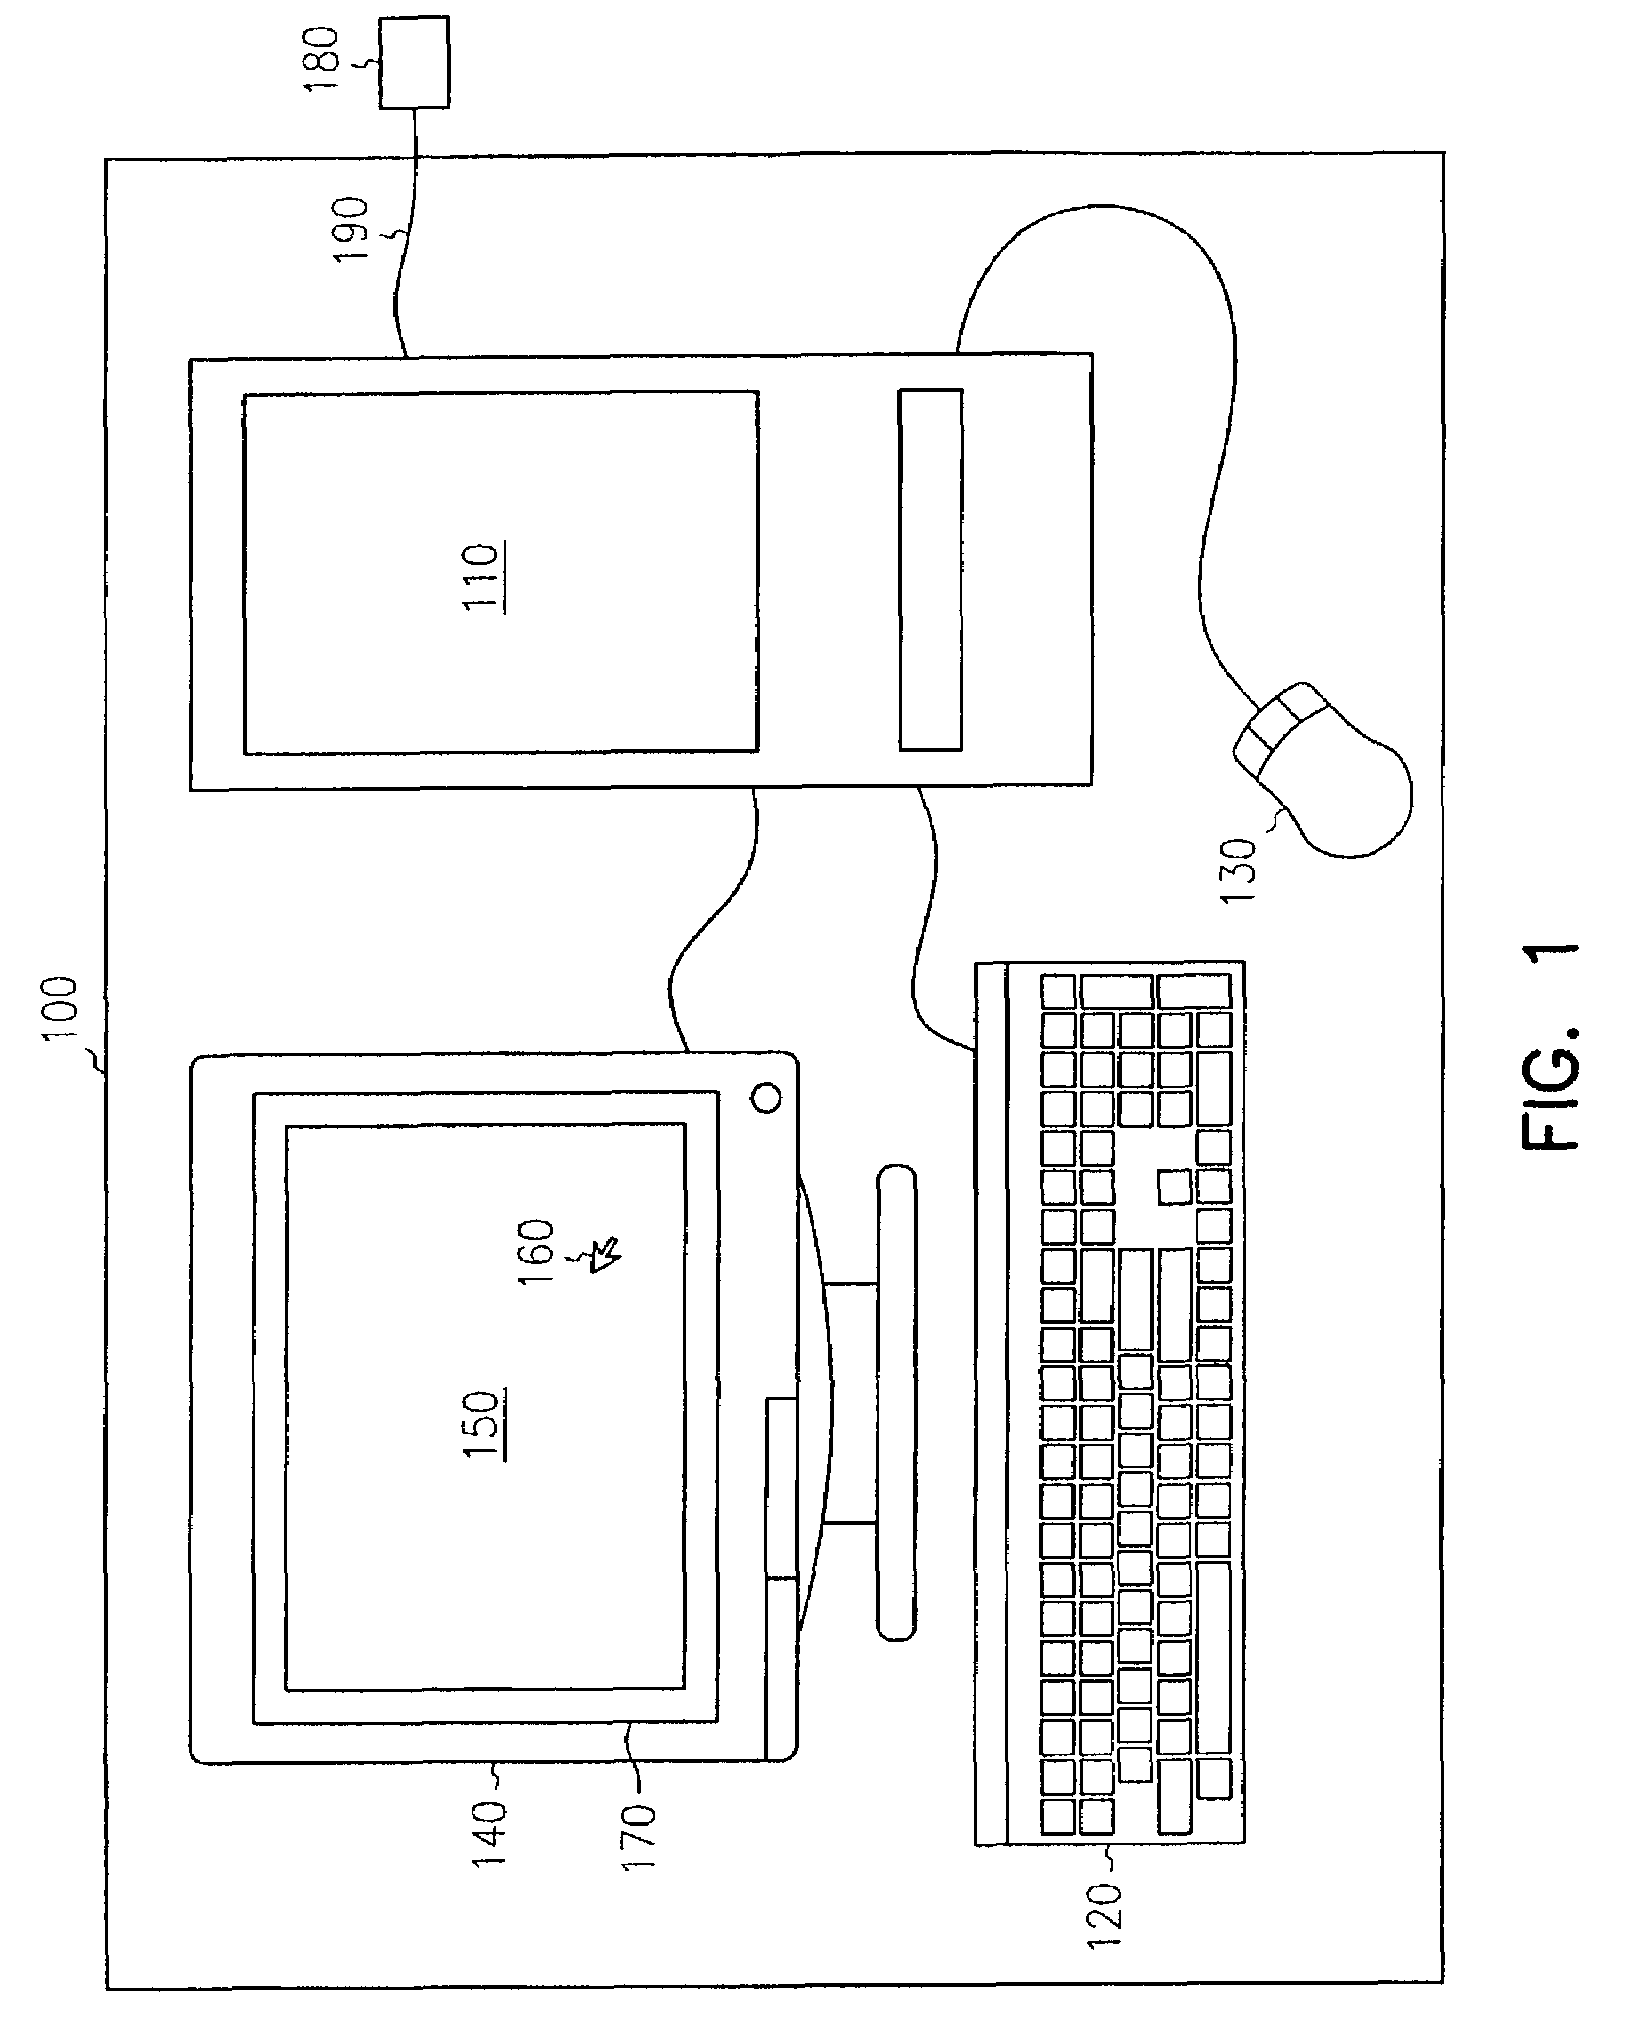 Programmable interface for fitting hearing devices